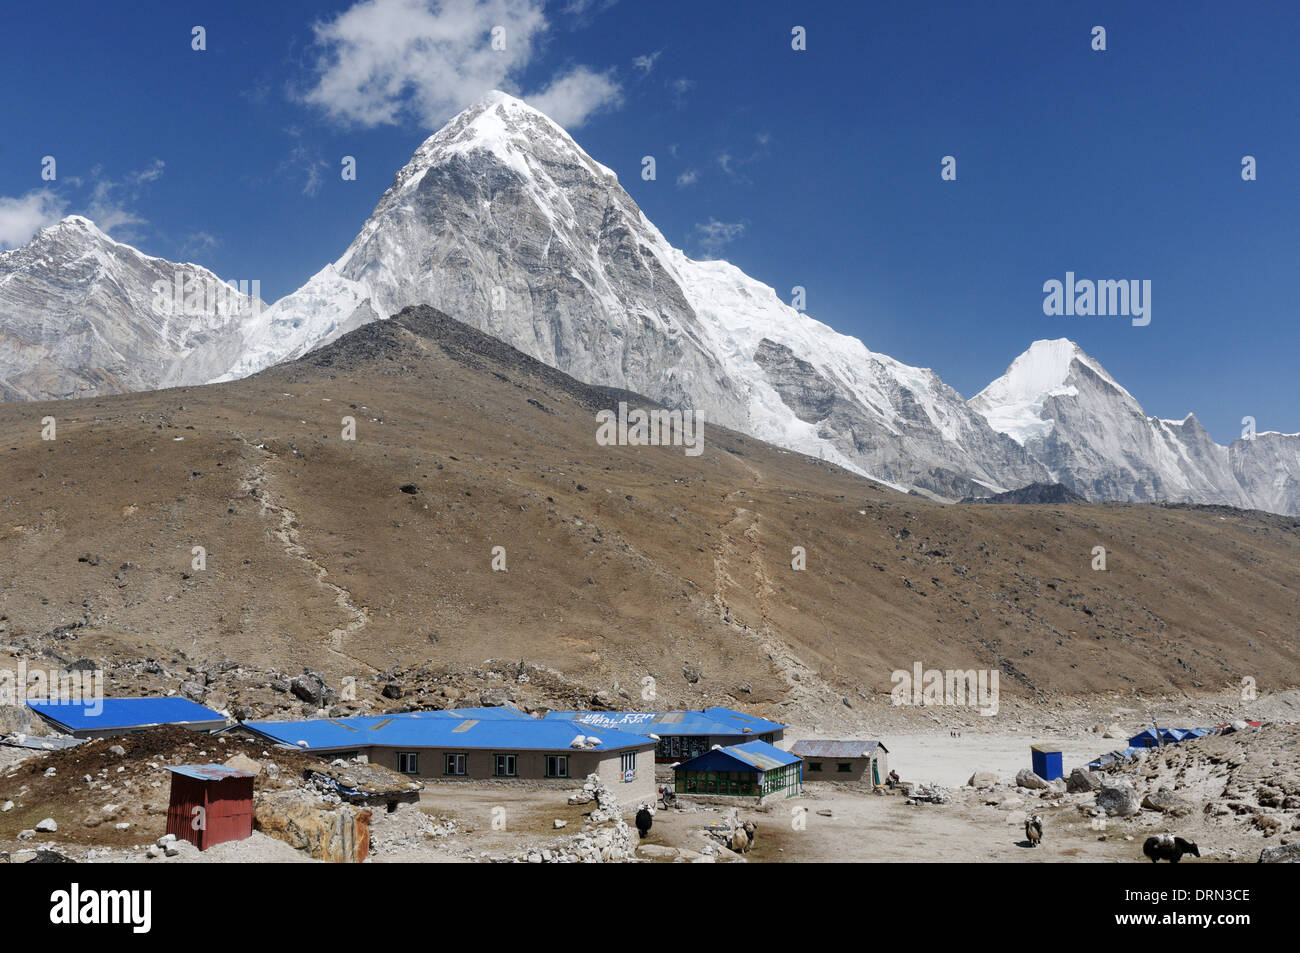 THe himalayan village of Gorak Shep, the last stop on the Everest Base camp trek in Nepal Stock Photo